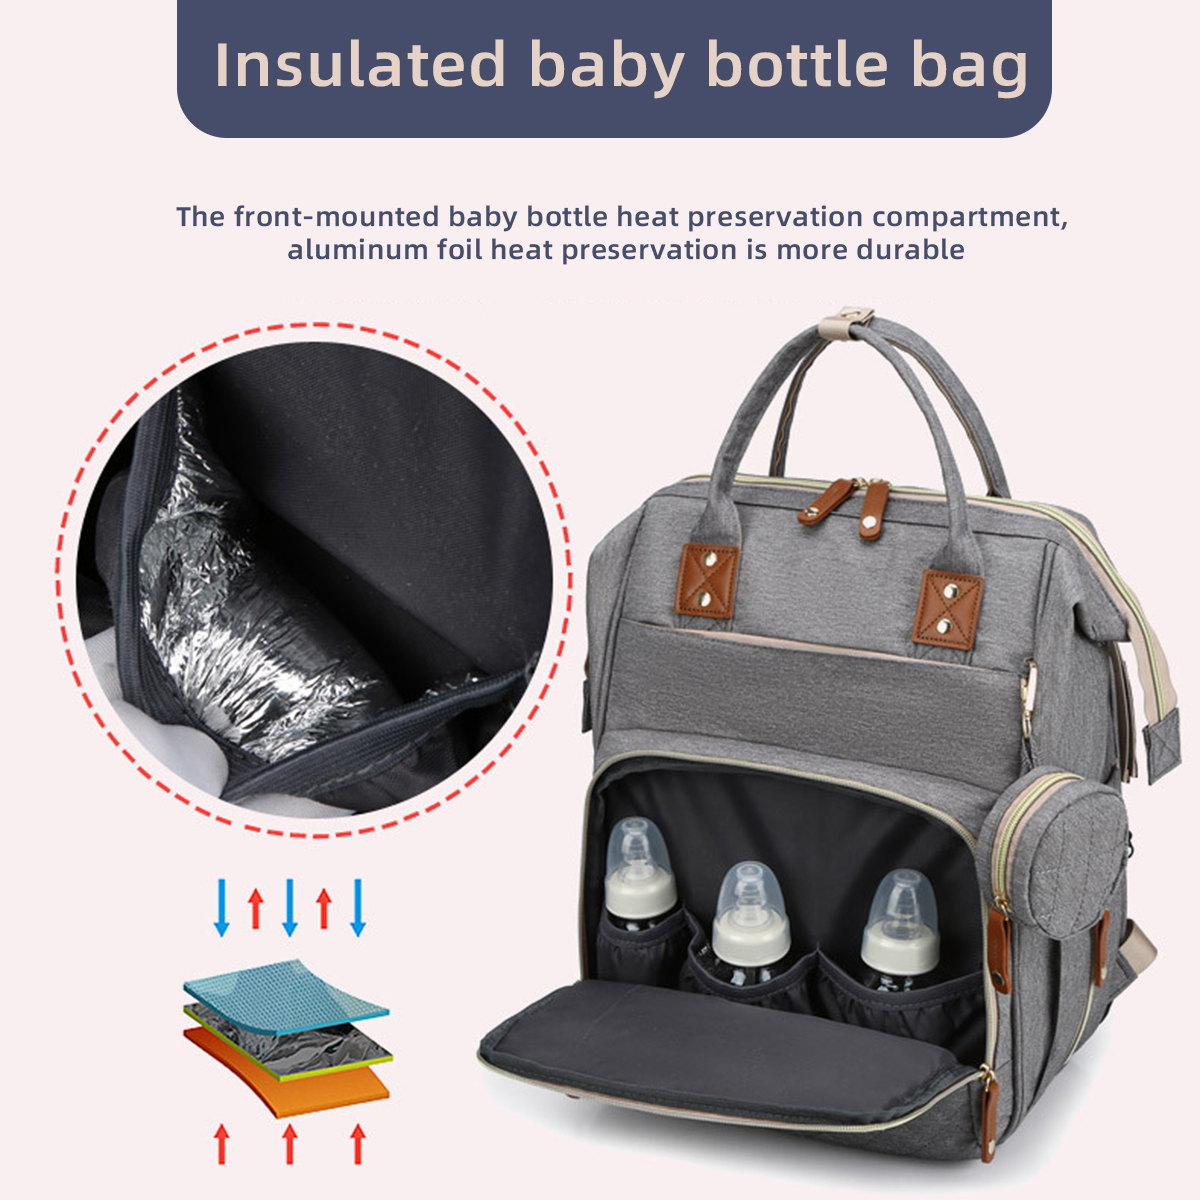 Mummy-Backpack-USB-Port-Folding-Bed-Diaper-Bag-Multifunction-Outdoor-Travel-1836767-3